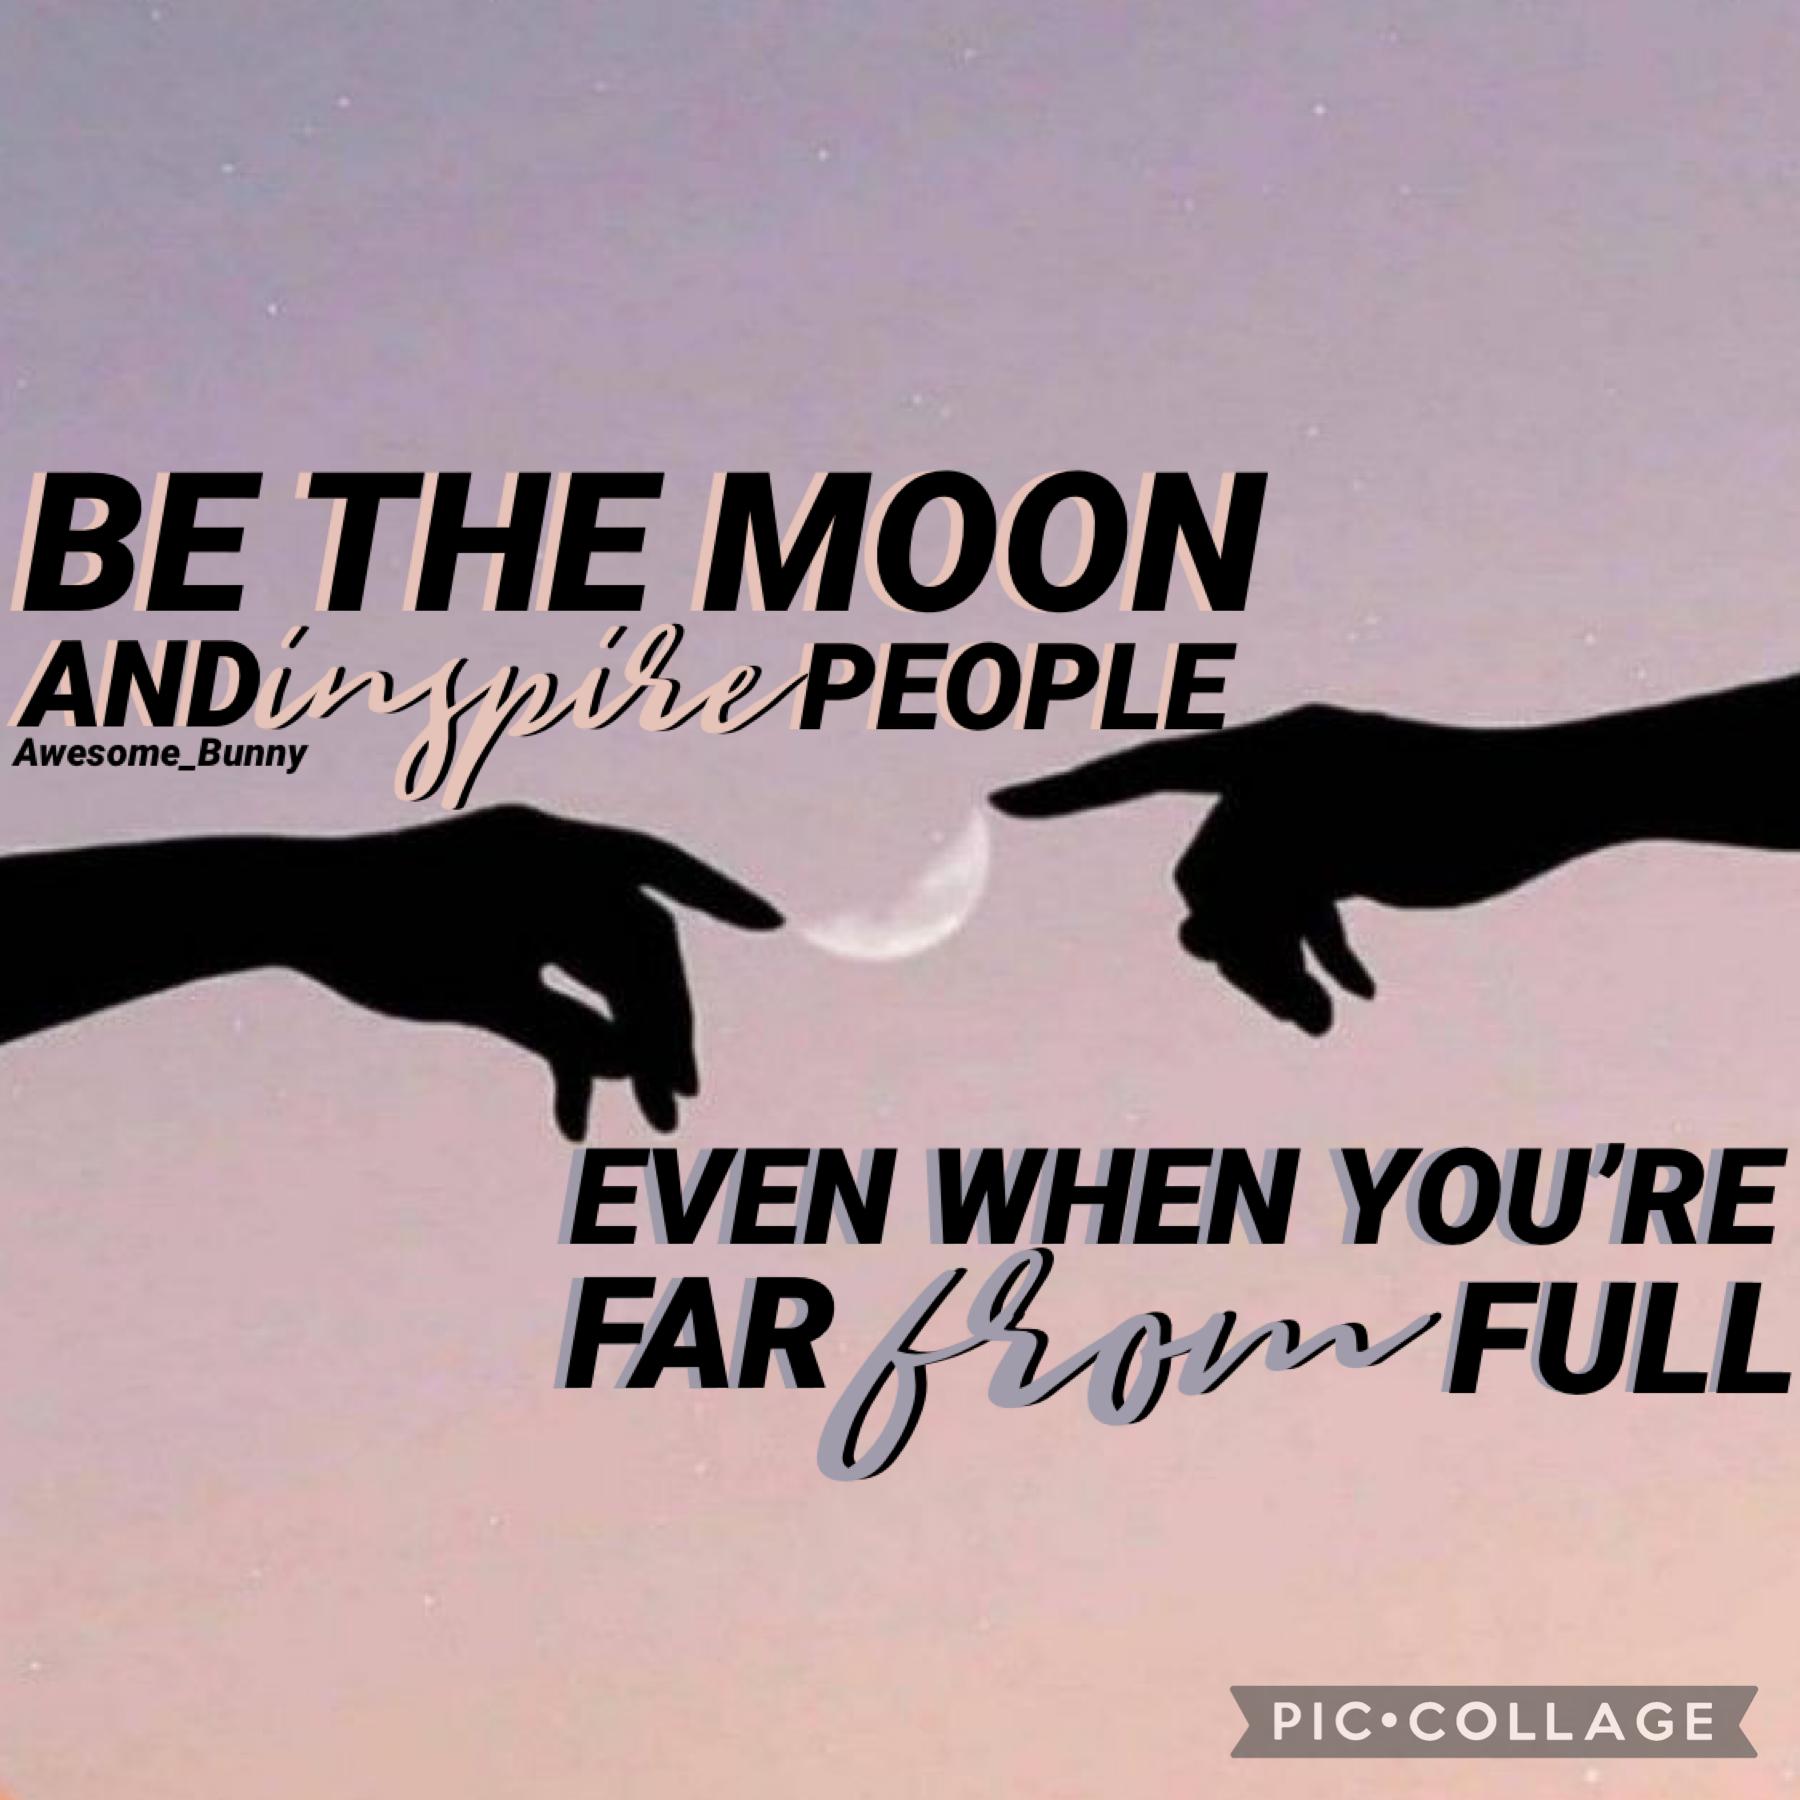 4/3/22 | You’re my moon